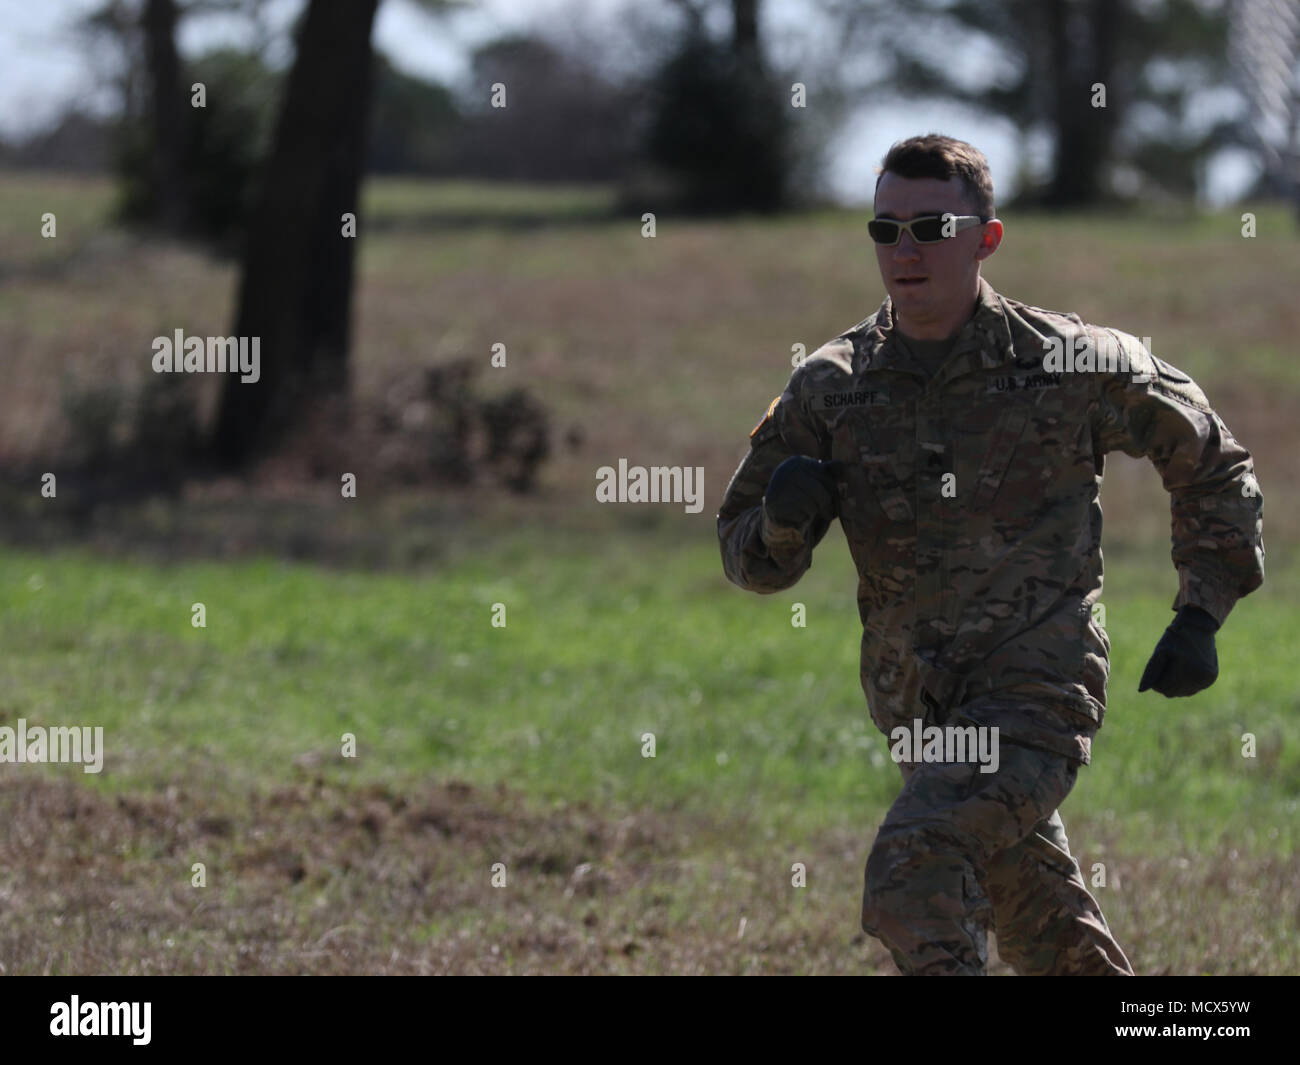 Texas Army National Guard Sgt. Peter Scharff of the the 176th Engineering Brigade sprints to the first obstacle of the Texas Military Department Best Warrior Competition, March 1, 2018 at Camp Swift near Bastrop, Texas. The competition brought 31 competitors together from across the Texas Army and Air National Guards, the Chilean Armed Forces and the Czech Republic military. (U.S. Army National Guard photo by Spc. Jason Archer) Stock Photo